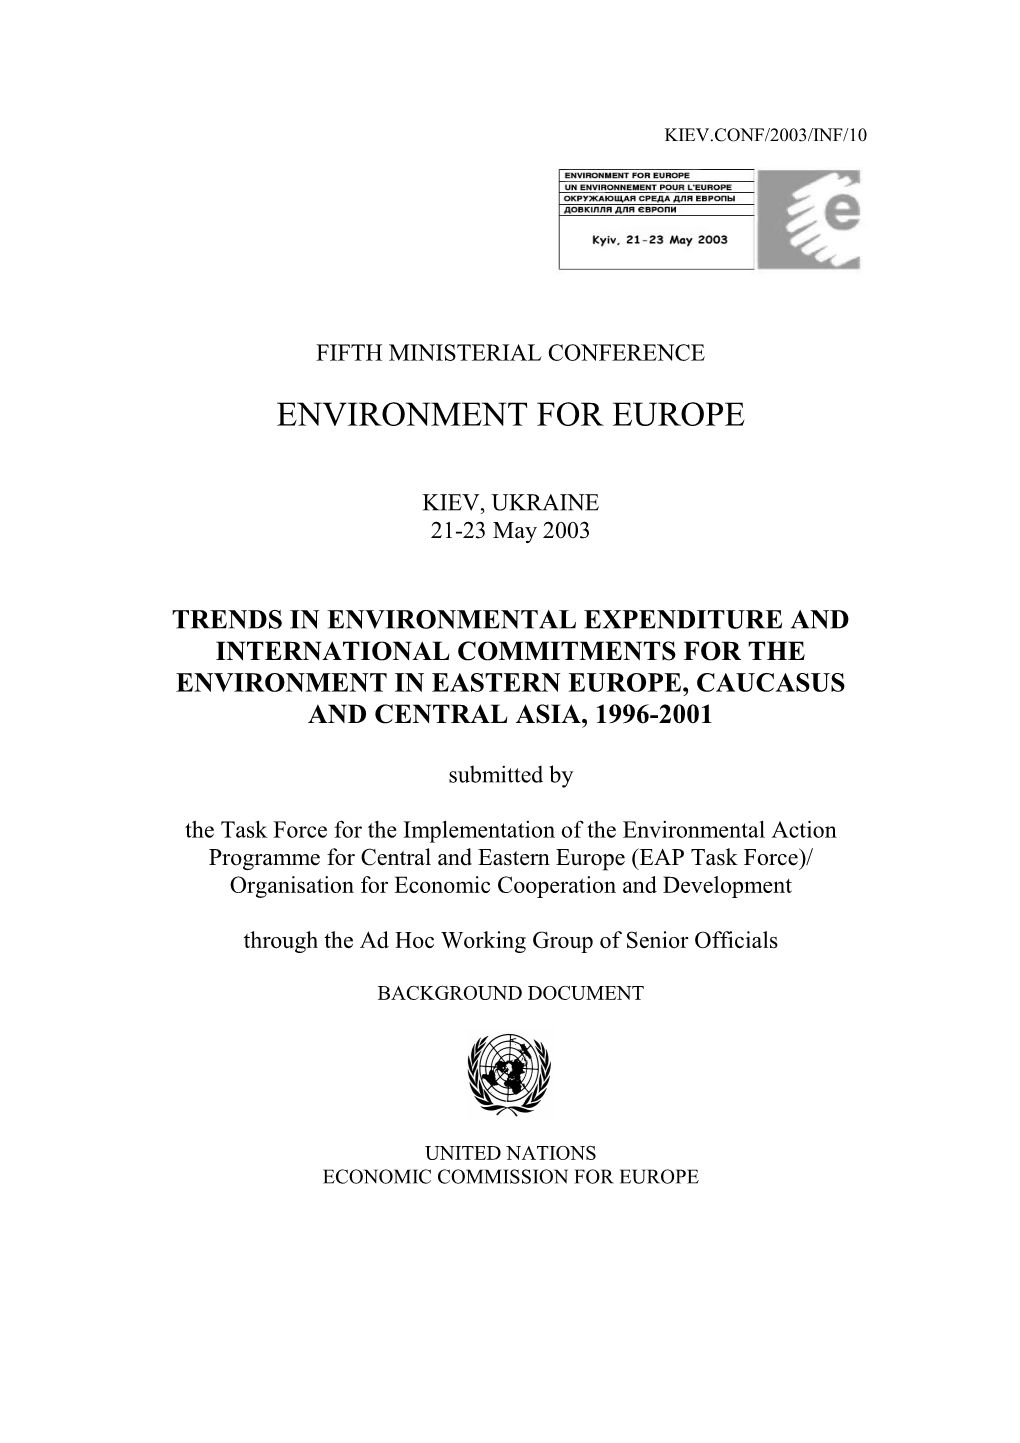 Environment for Europe